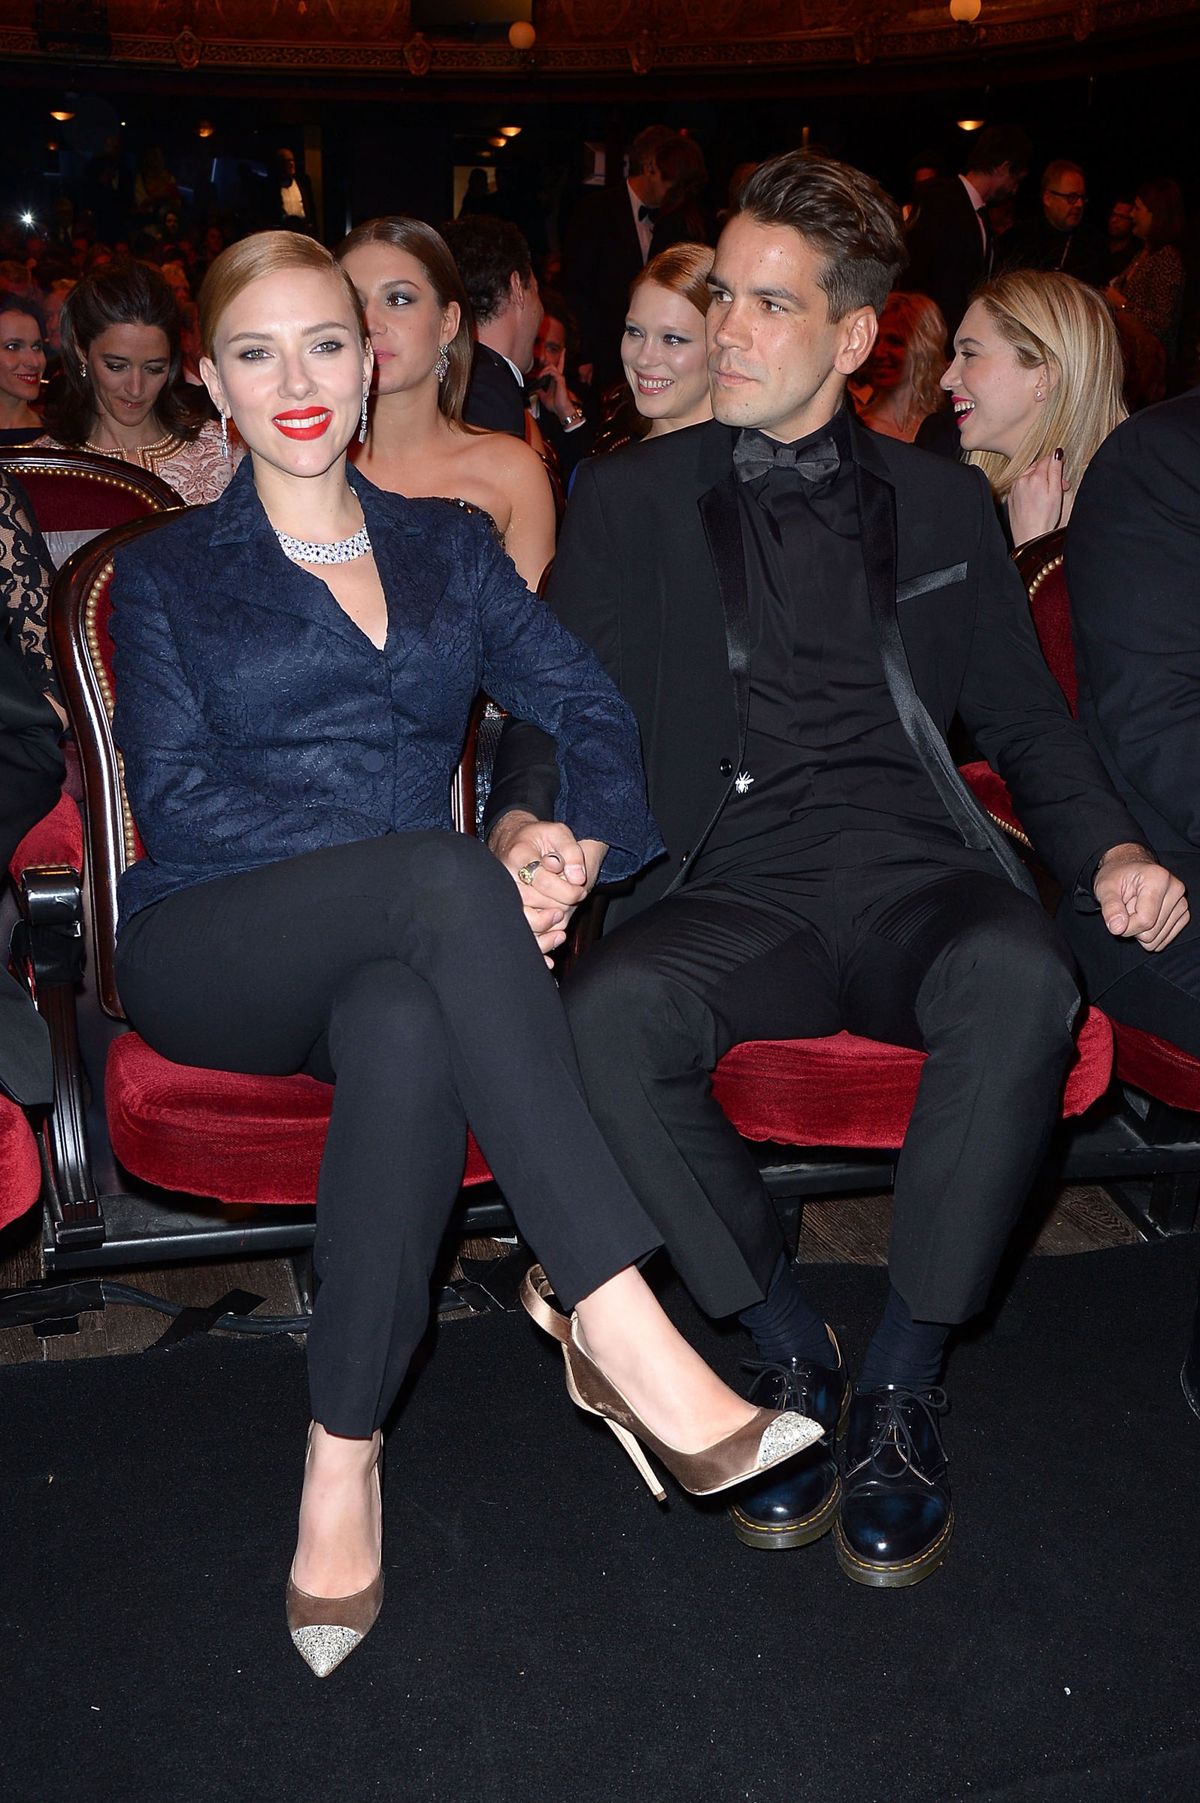 Scarlett Johansson and Romain Dauriac sit in the audience before the start of the 39th Cesar Film Awards 2014 at Theatre du Chatelet on February 28, 2014 in Paris, France. (Photo by Dominique Charriau/Getty Images)